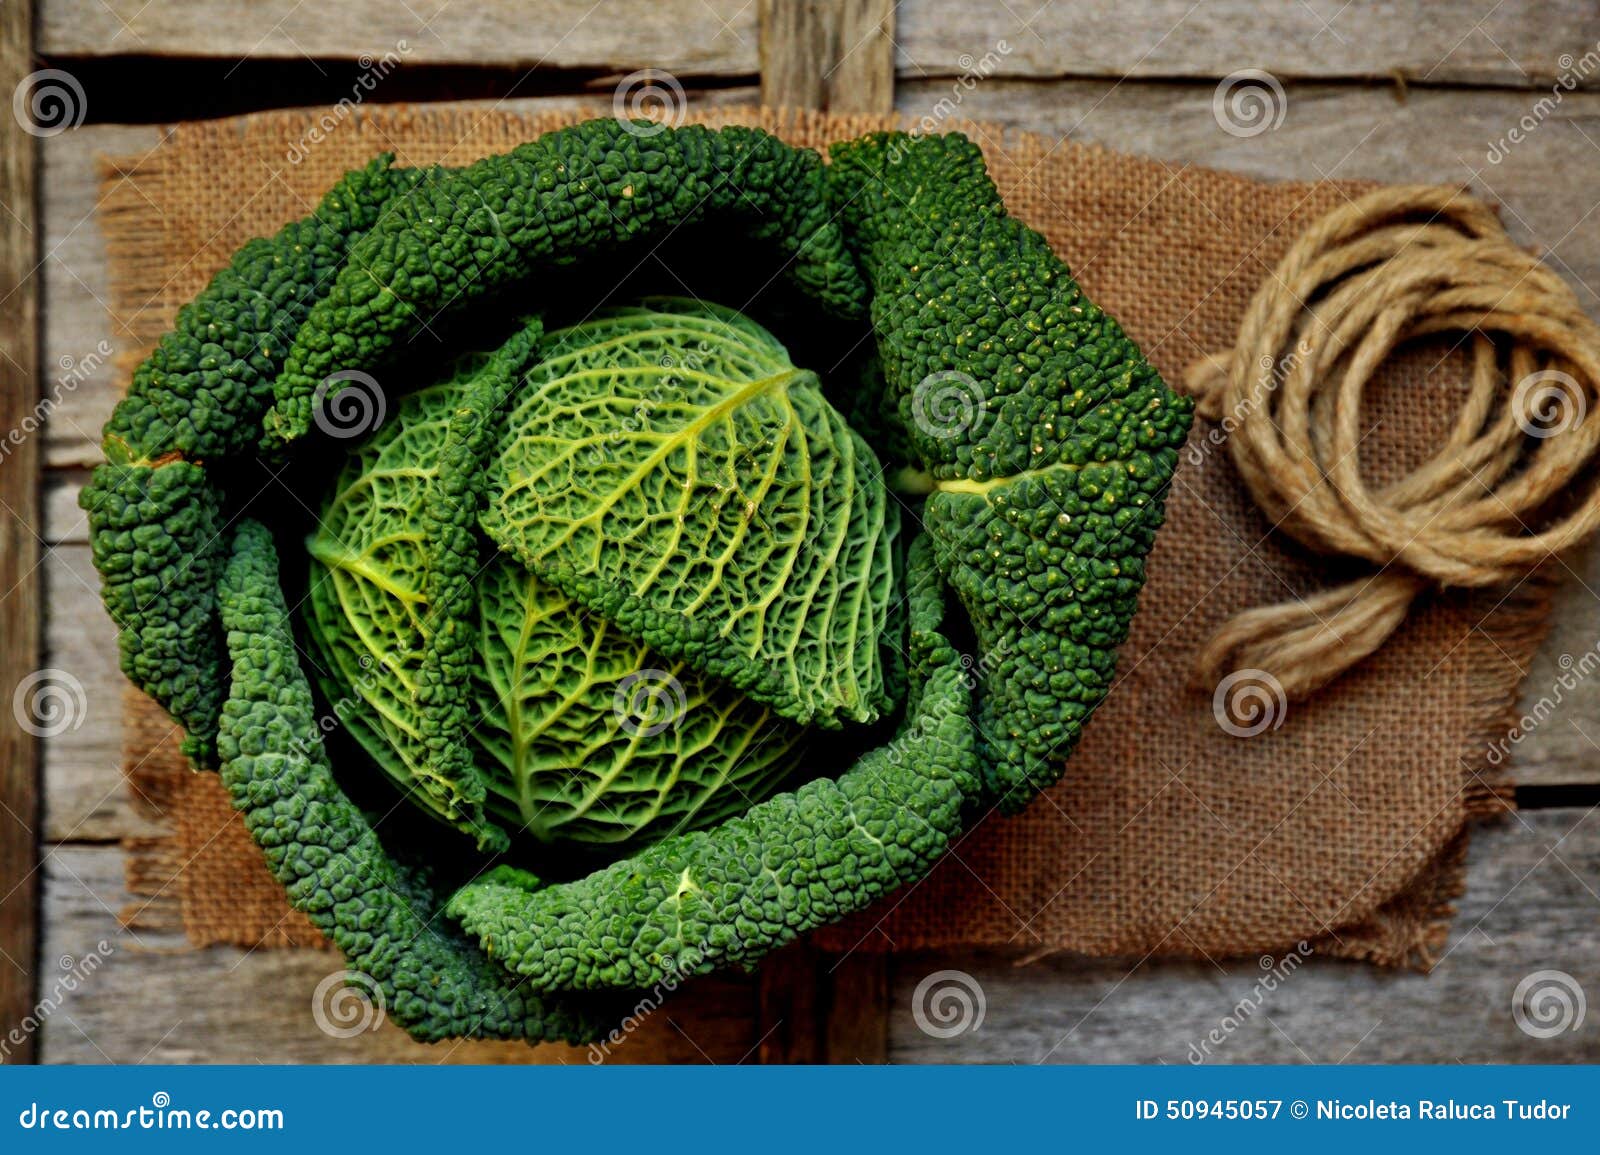 organic vegetables : green cabbage on a wooden board